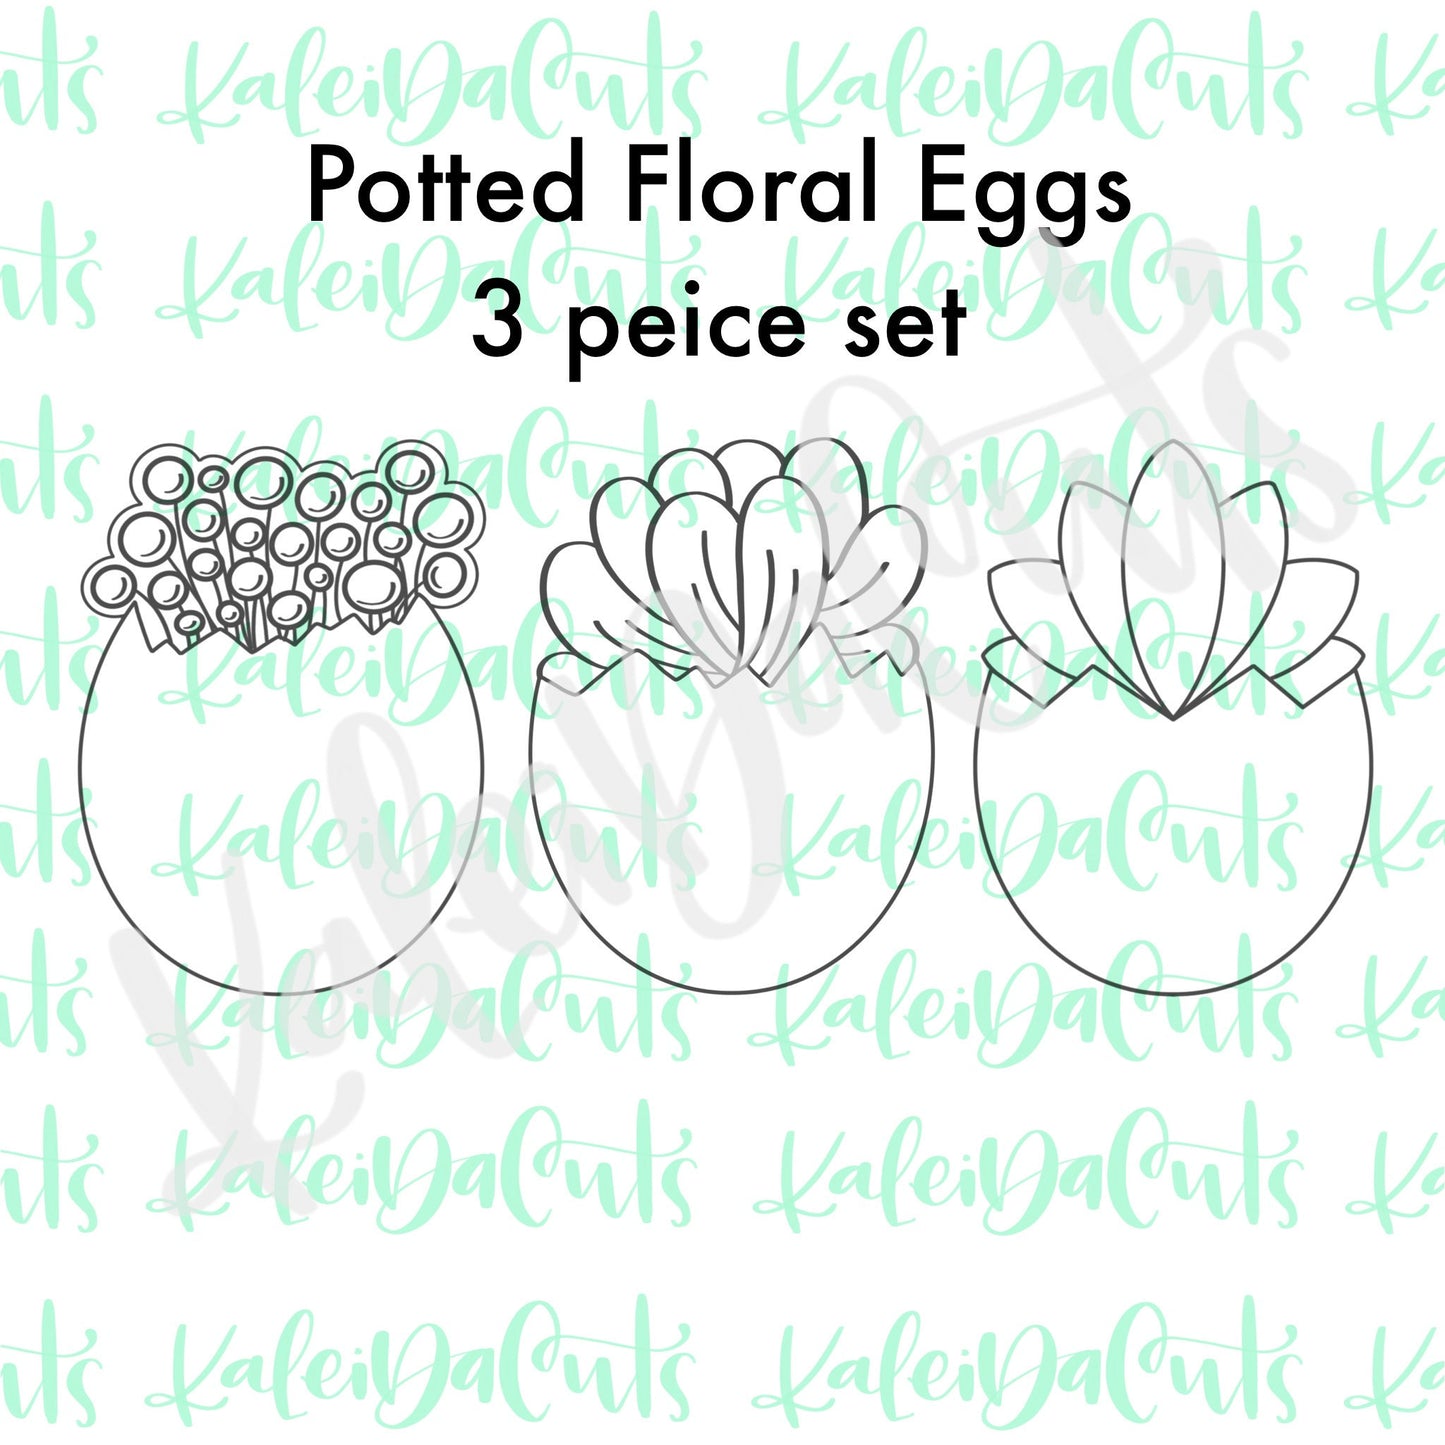 Potted Floral Eggs Set of 3 Cookie Cutters